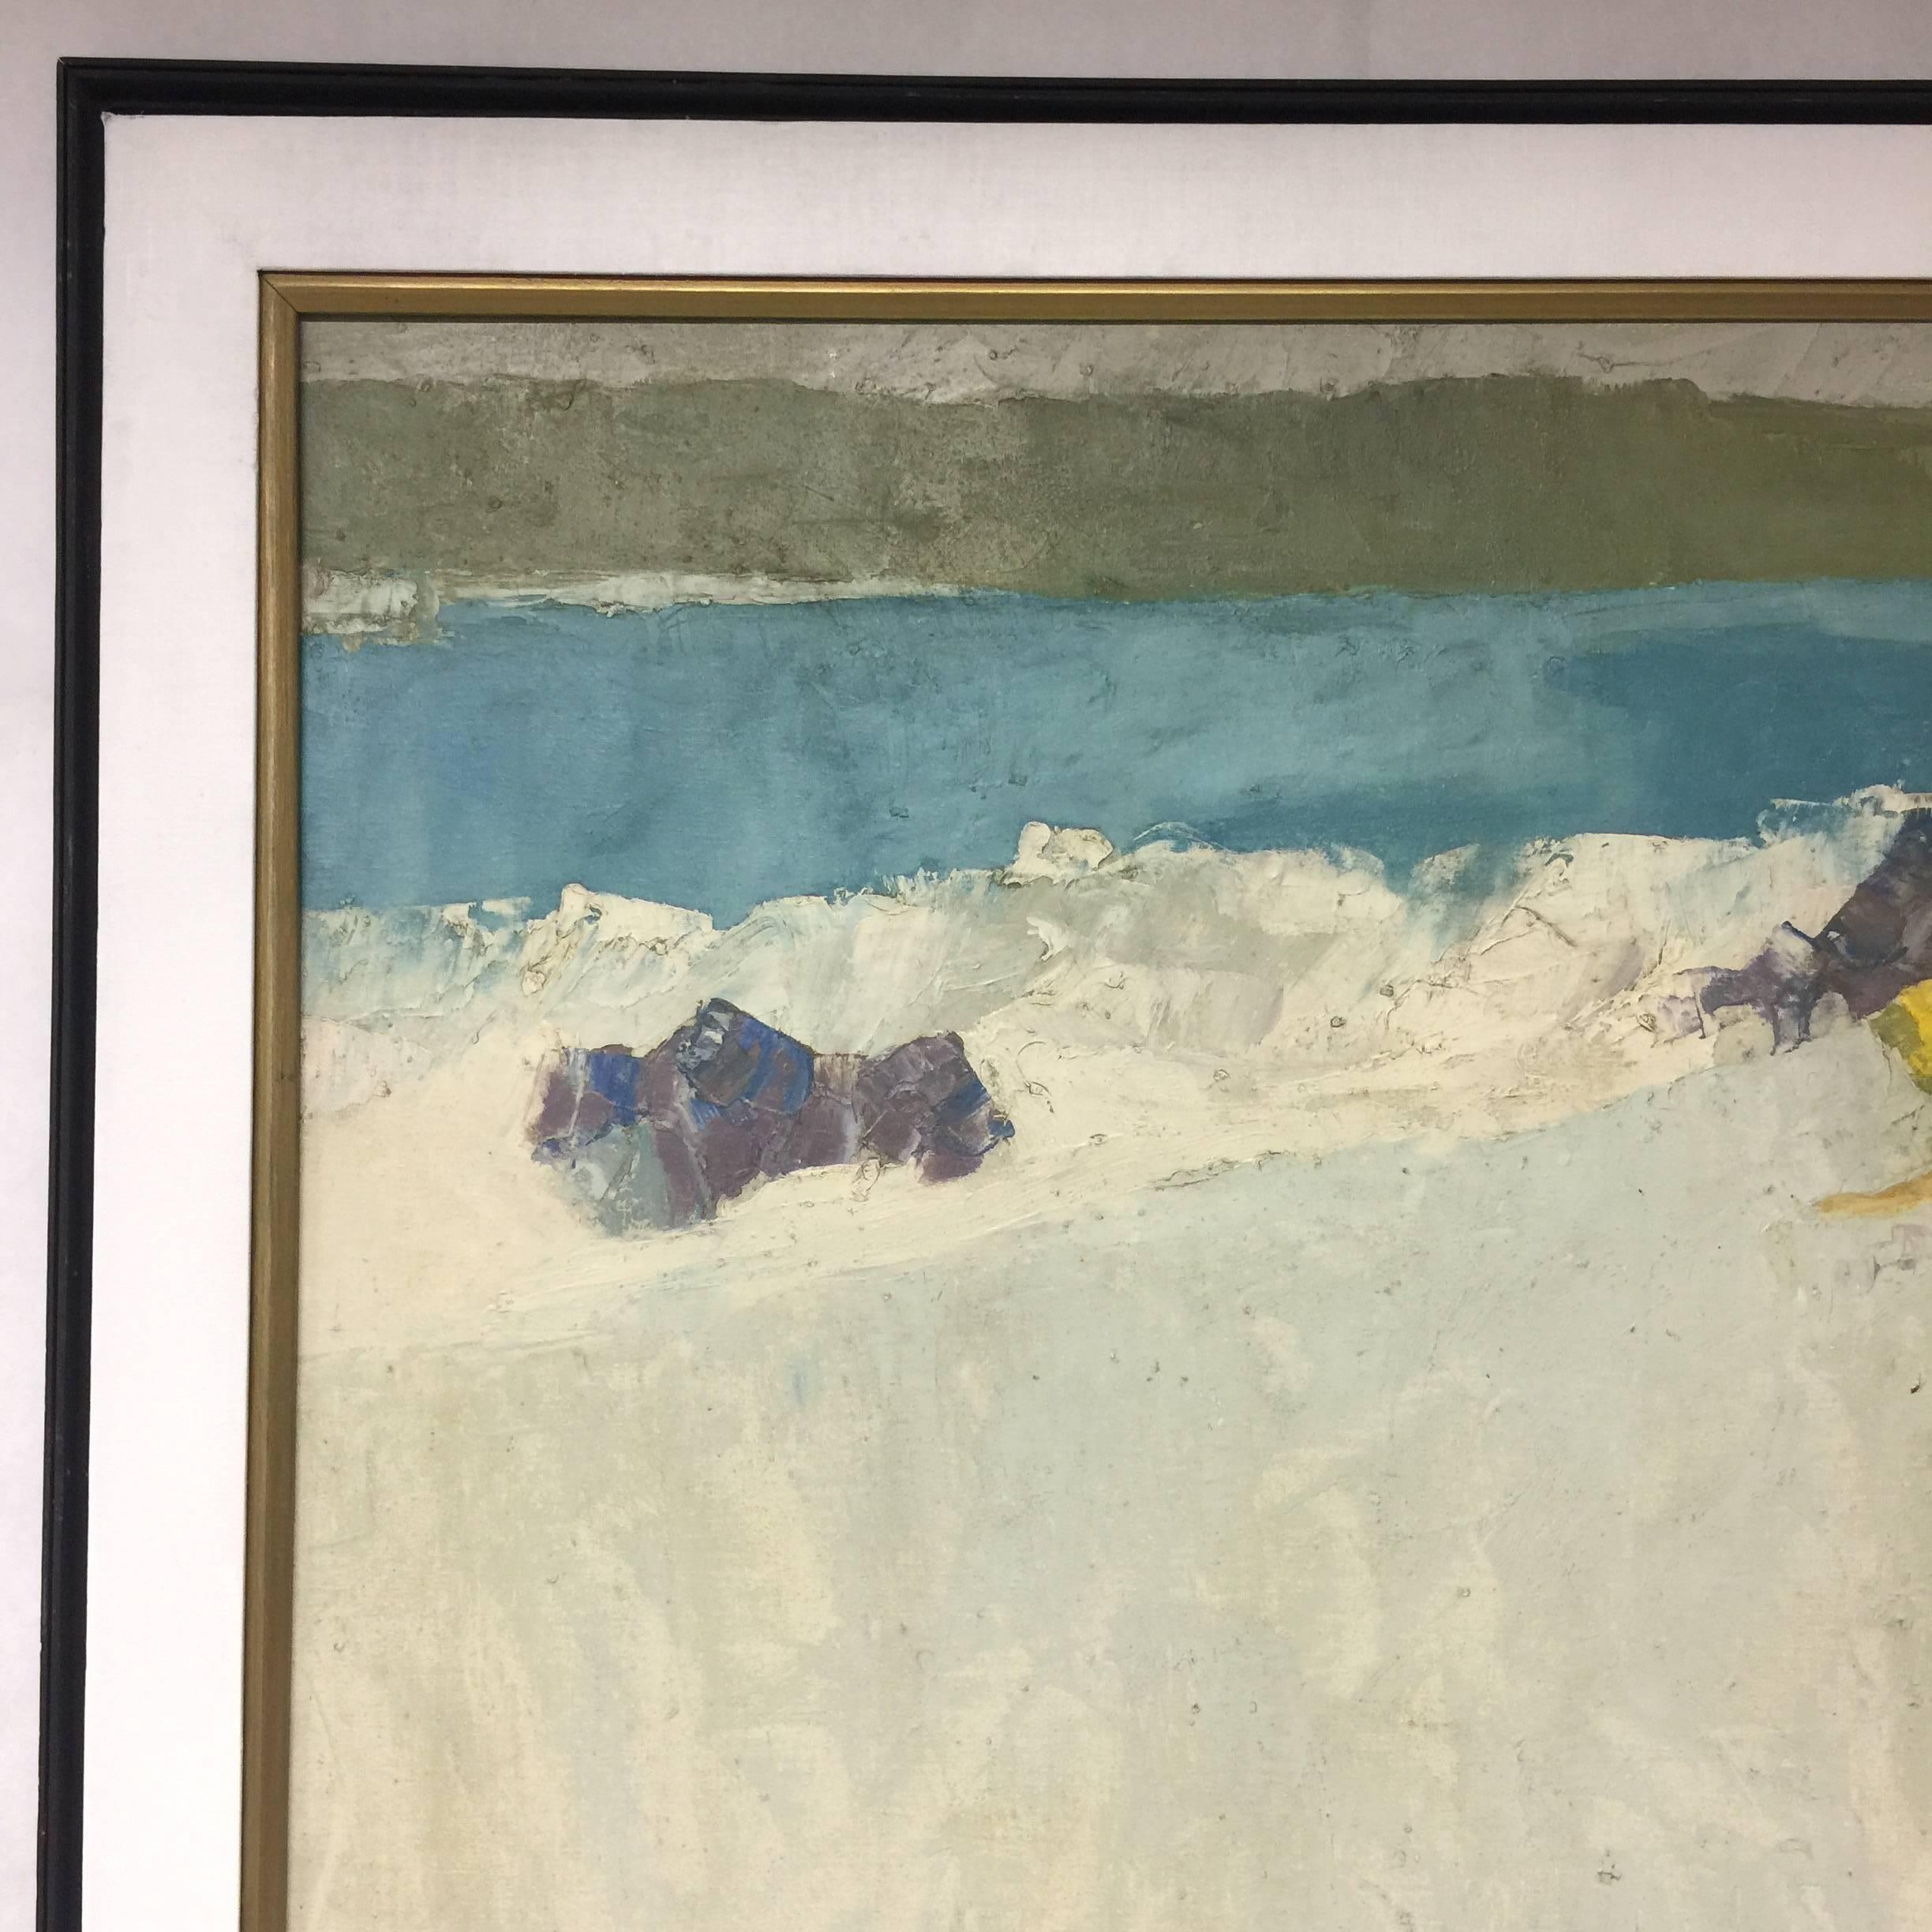 The perfect Modernist style beach scene by celebrated New York City artist George Barrel (Italo Botti). Mr. Barrel would sign his paintings as both Barrel and Botti throughout his long career as an artist. This oil on canvas painting is on a wood